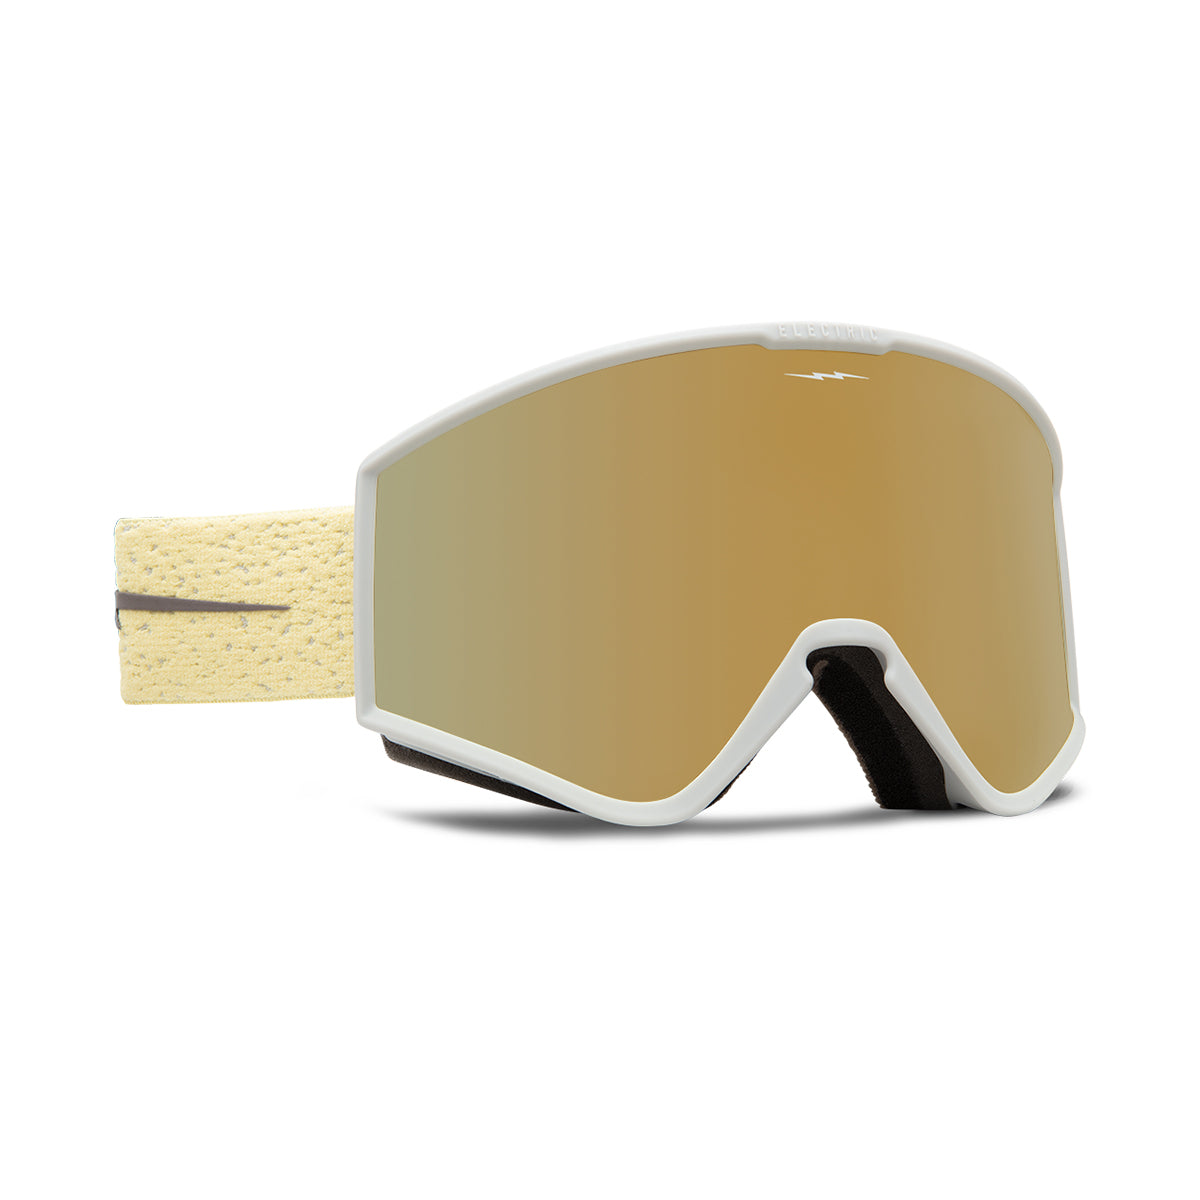 ELECTRIC KLEVELAND SNOWBOARD GOGGLES - CANNA SPECKLE